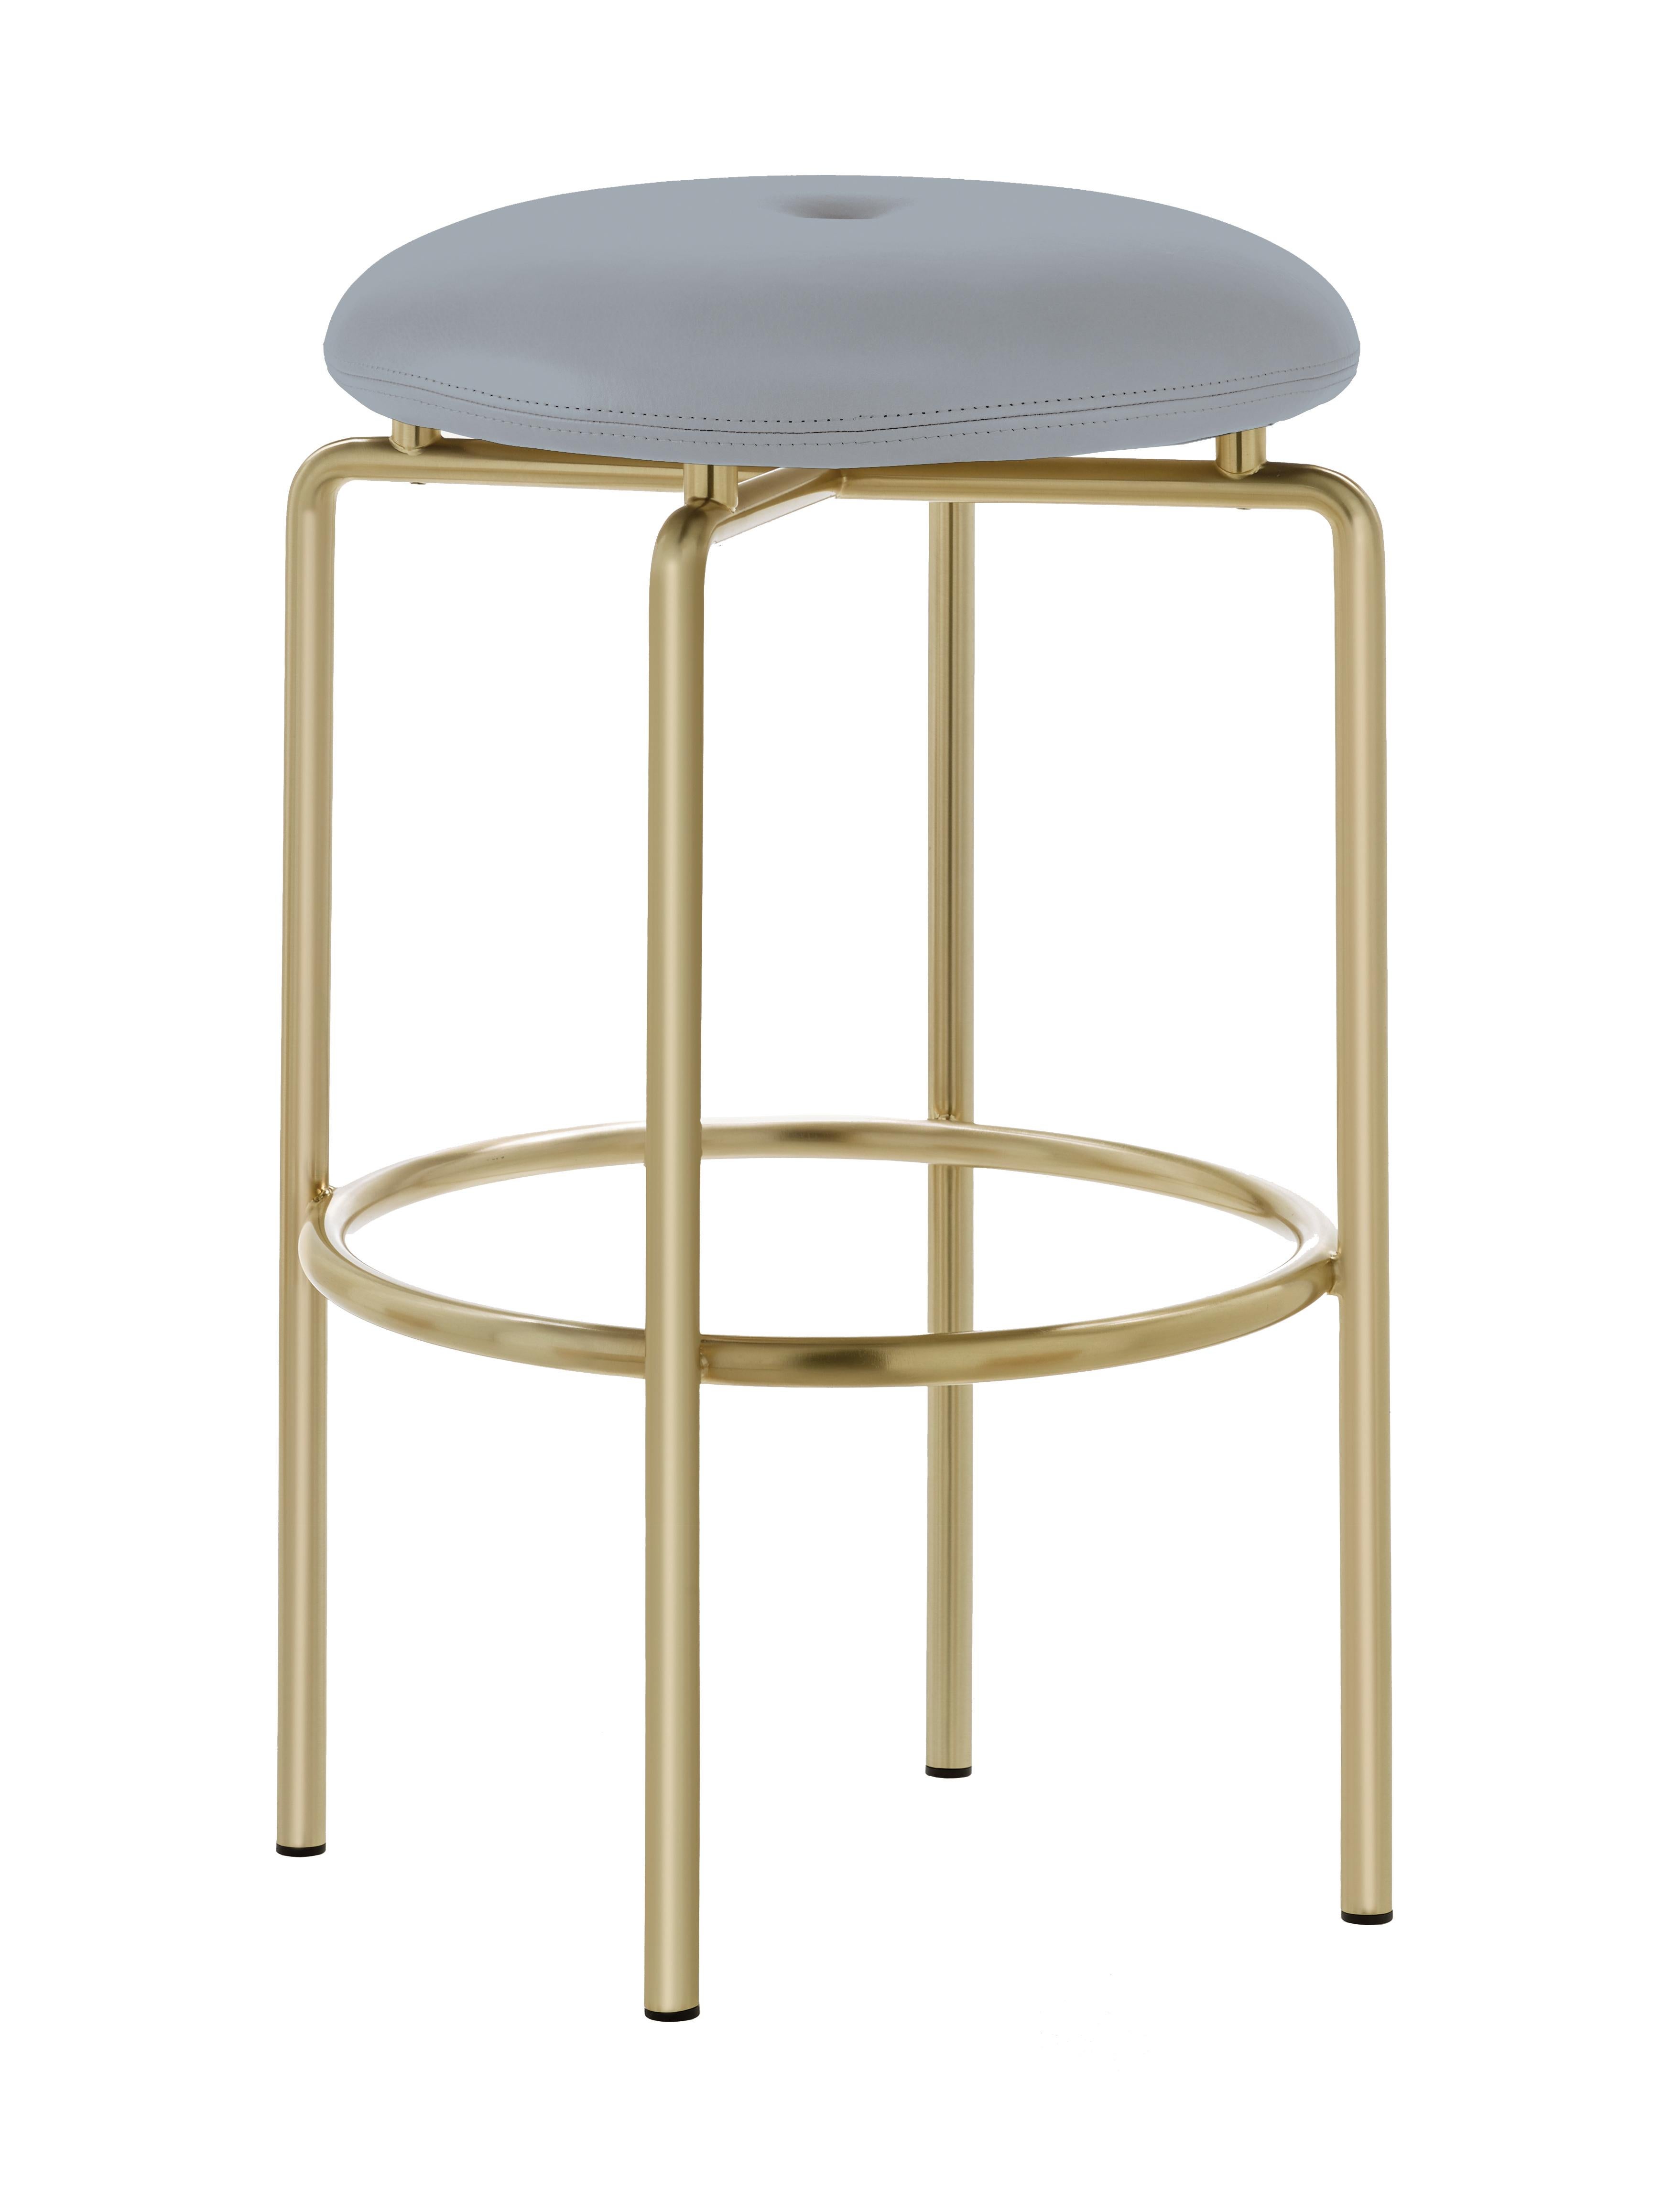 For Sale: Gray (Elegant 11038 Platinum Gray) Circular Counter Stool in Satin Brass and Leather Designed by Craig Bassam